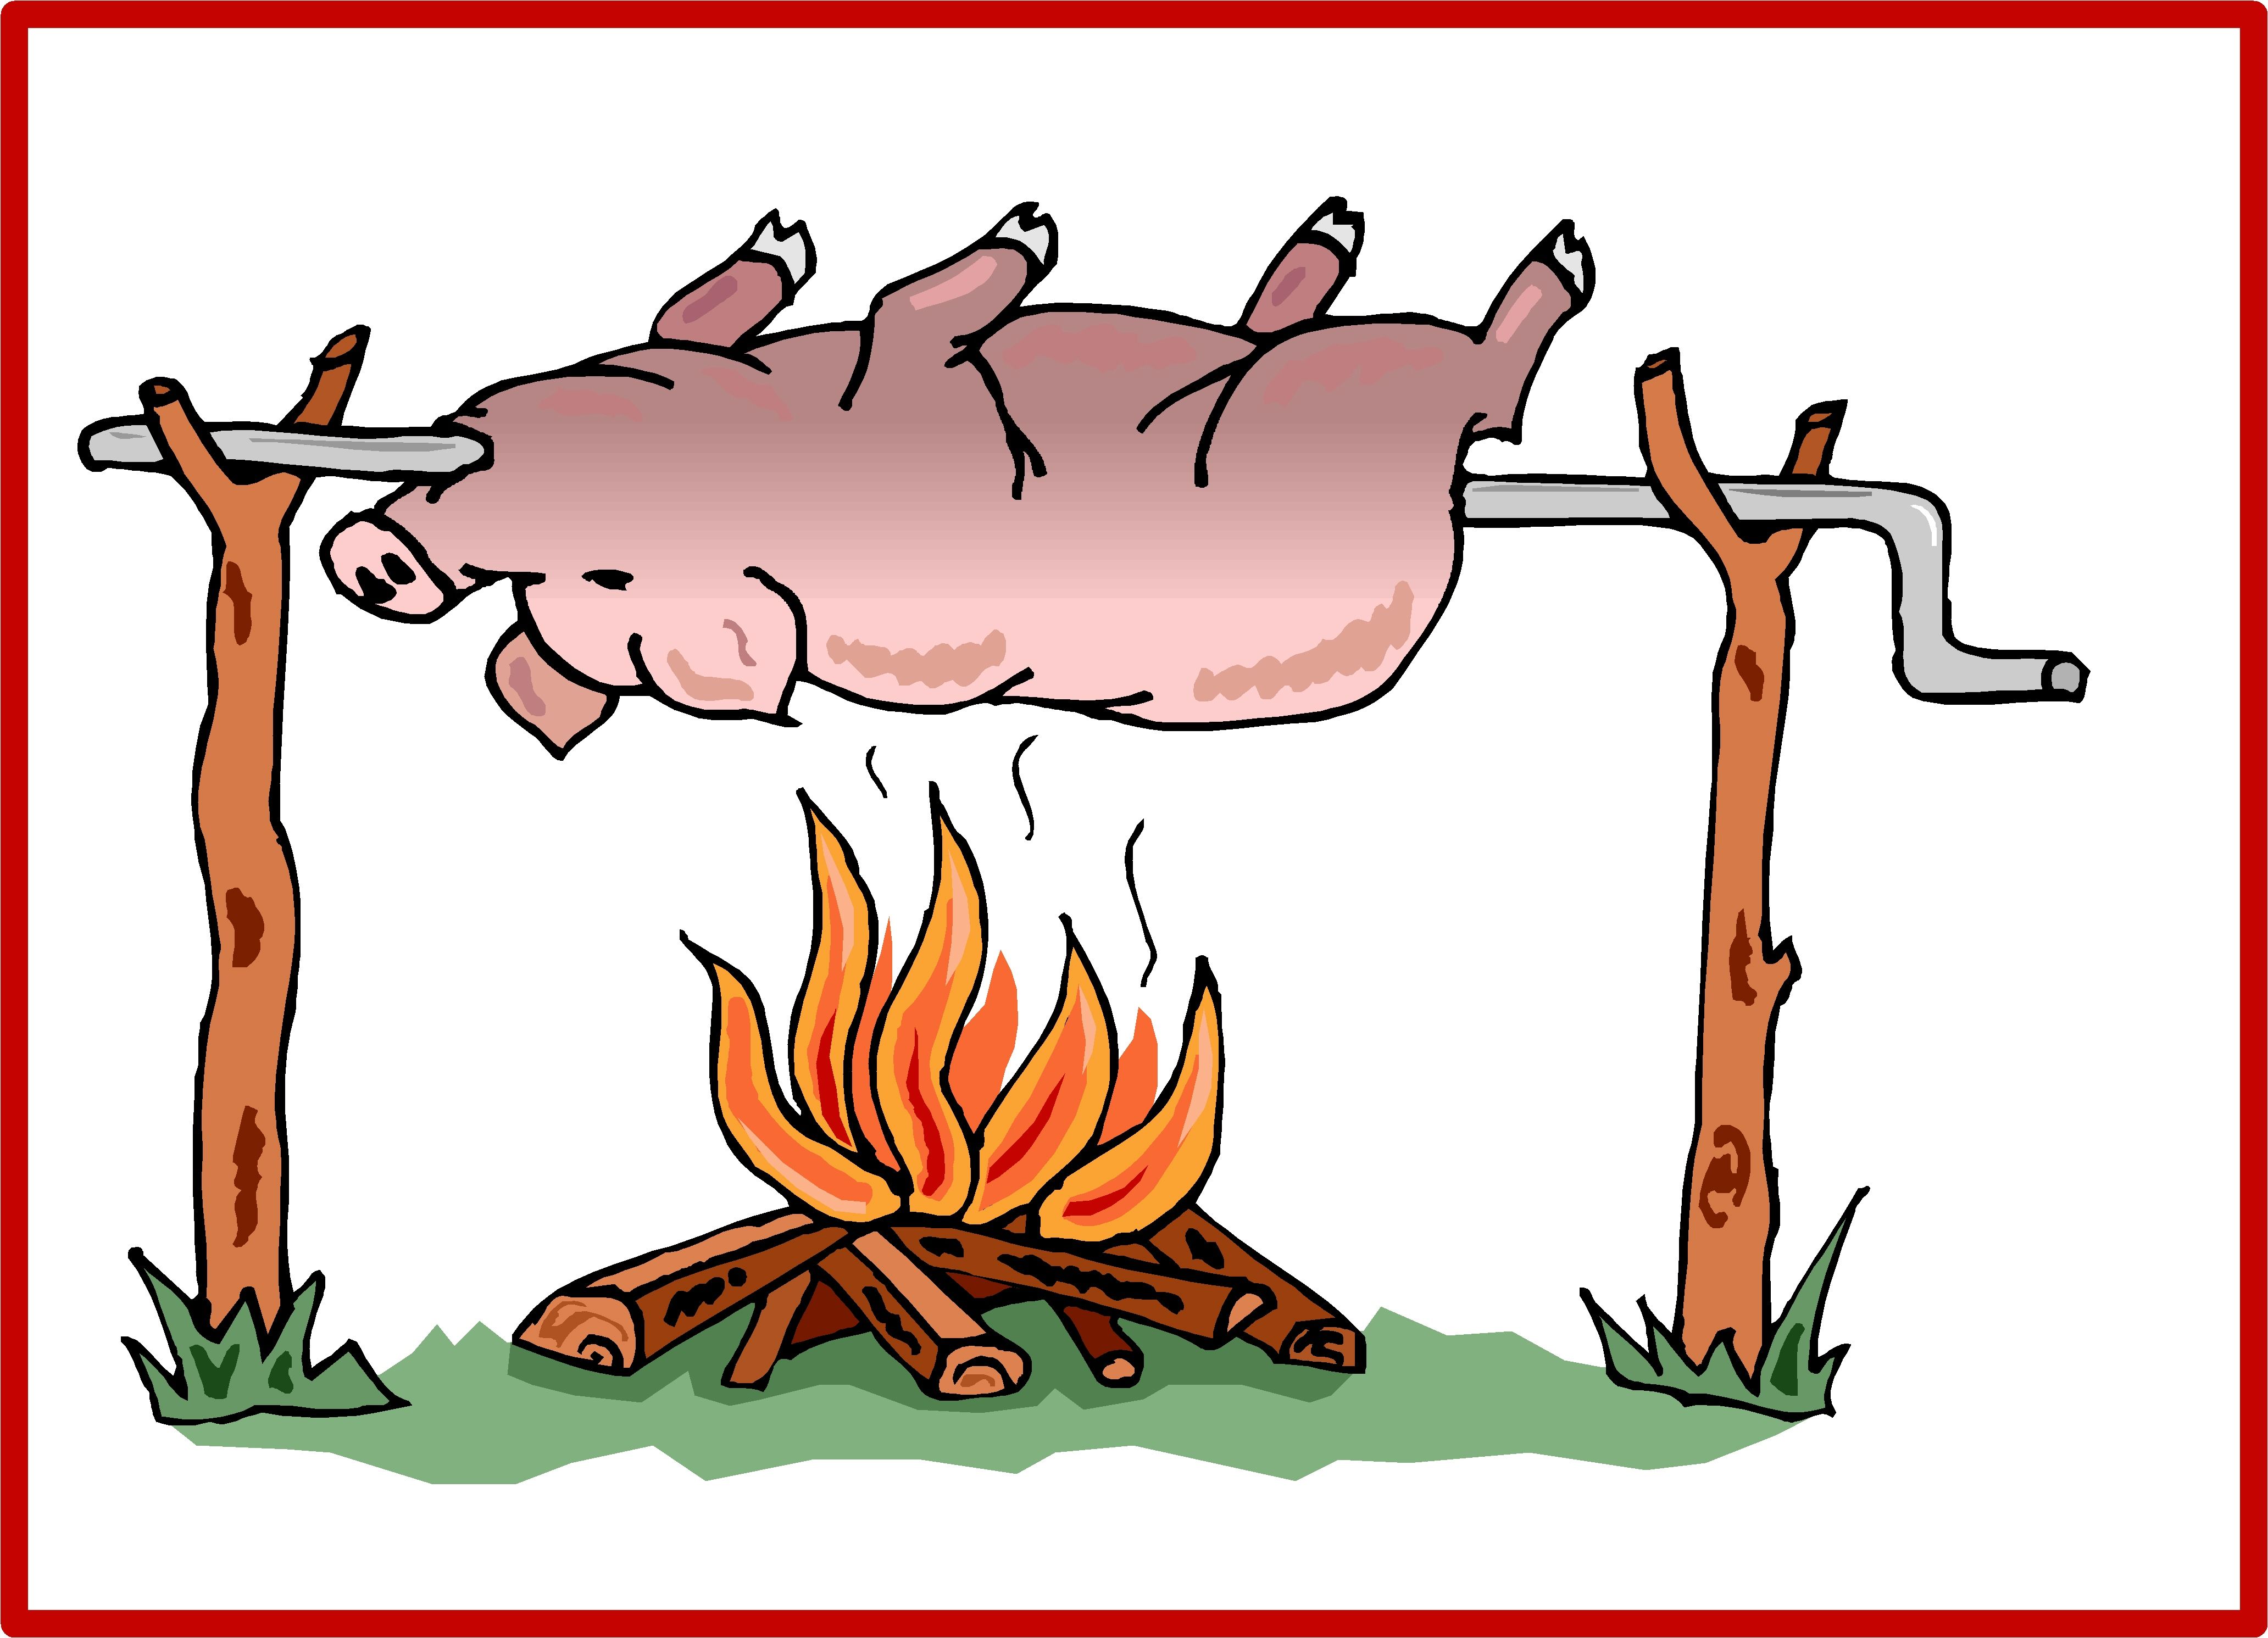 Barbecue Pig PNG Transparent Barbecue Pig.PNG Images. | PlusPNG